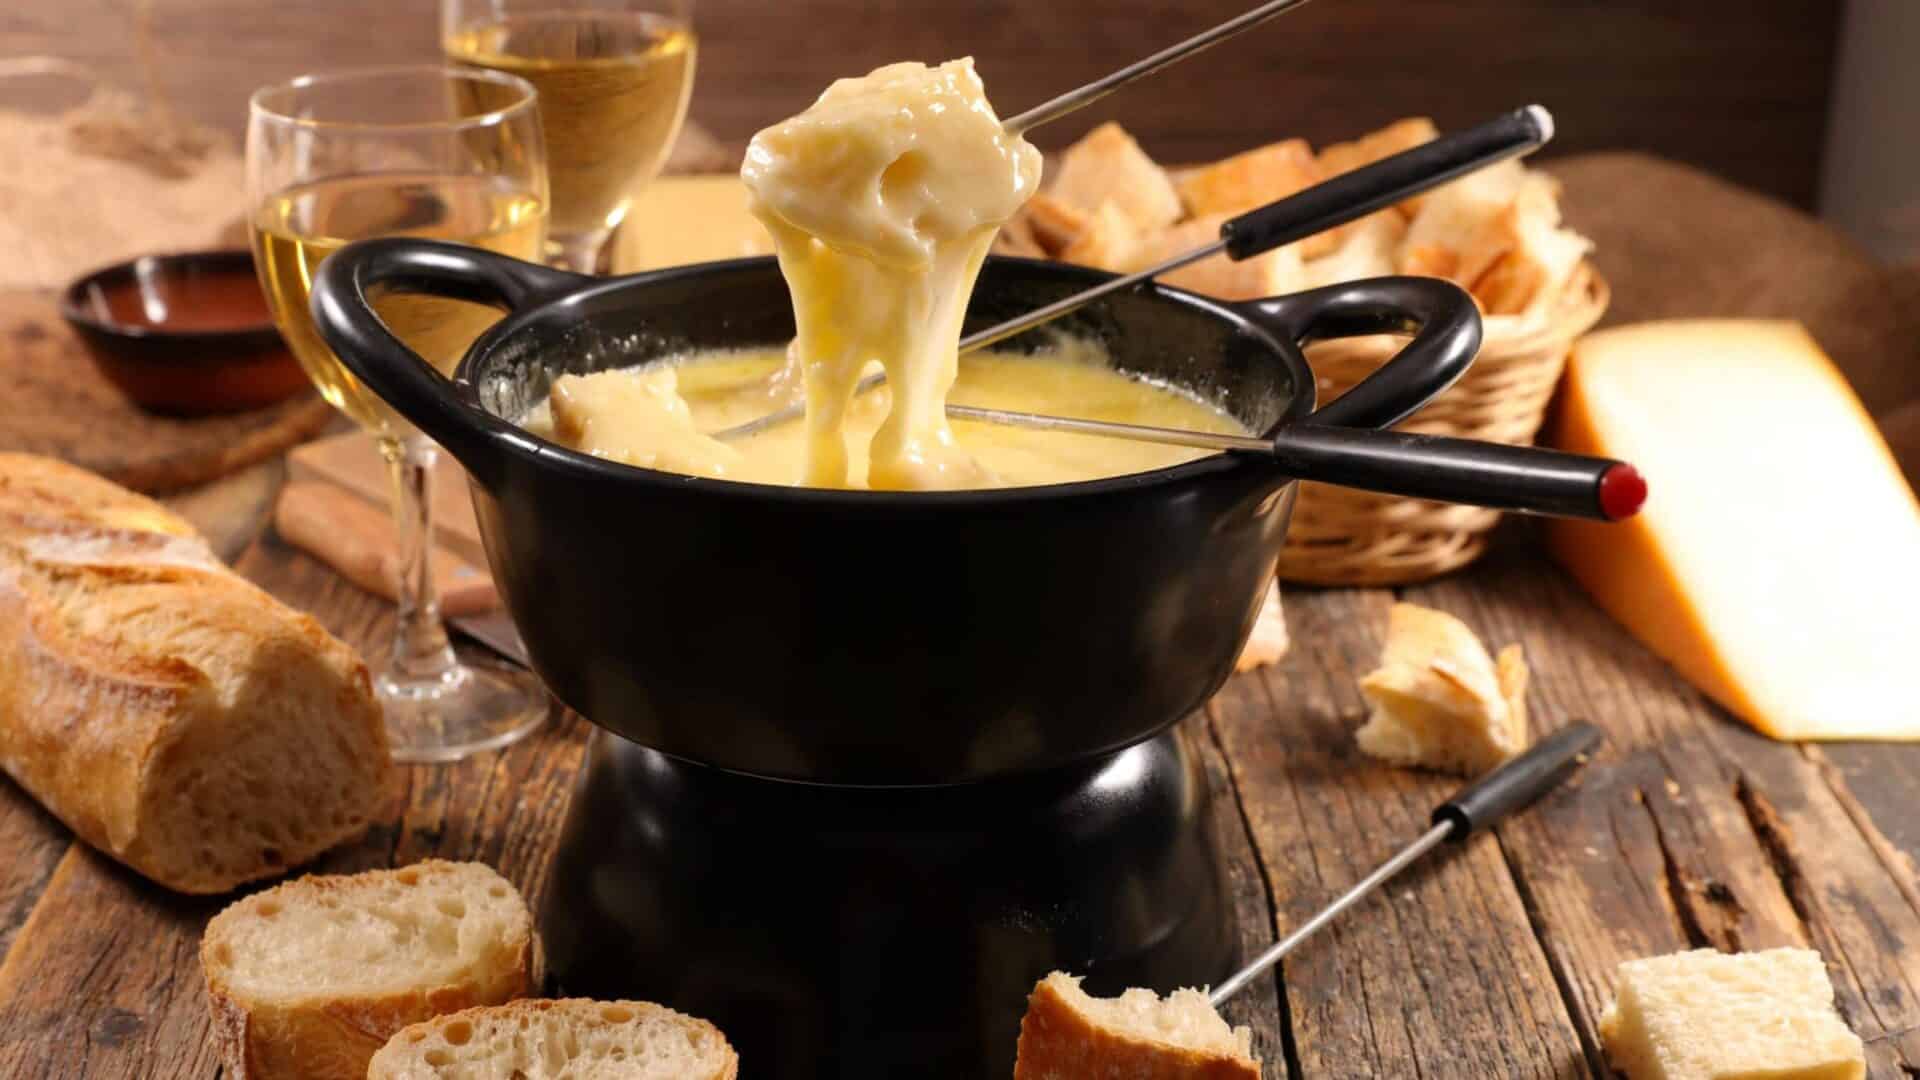 Black fondue pot with melted cheese and dipped bread with wine and more bread and cheese in the background